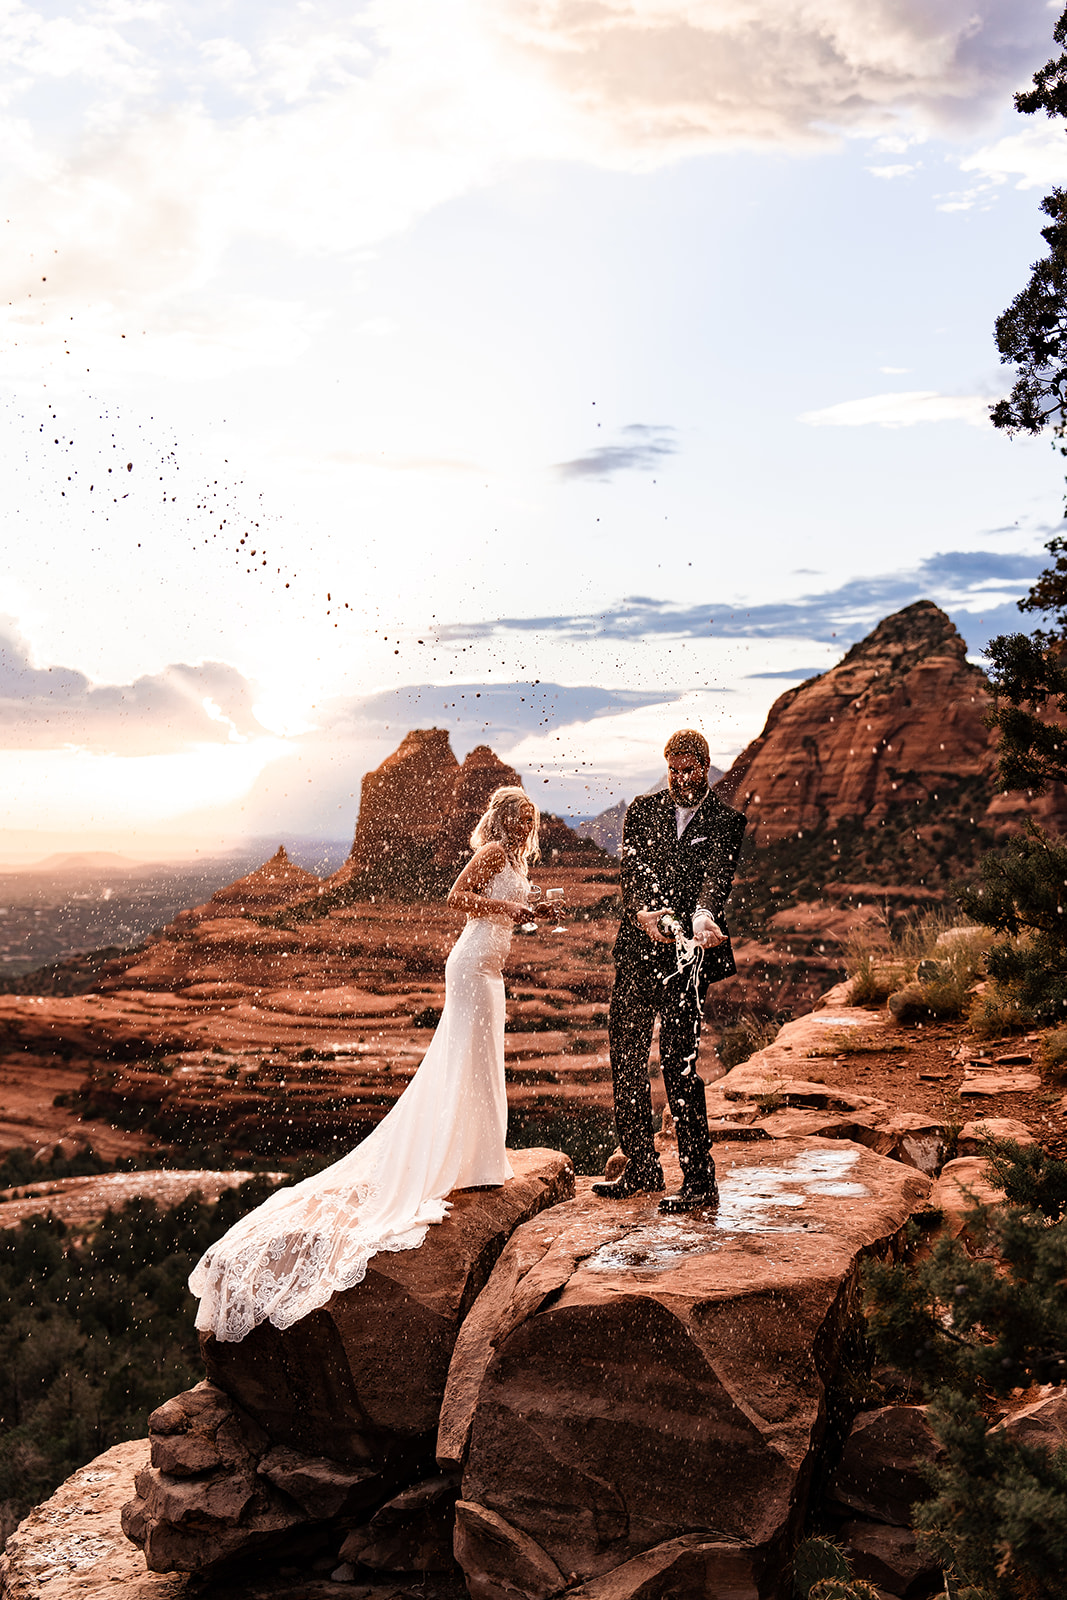 Elopement couple celebrating marriage at Merry Go Round Rock in Sedona with champagne bottle spray